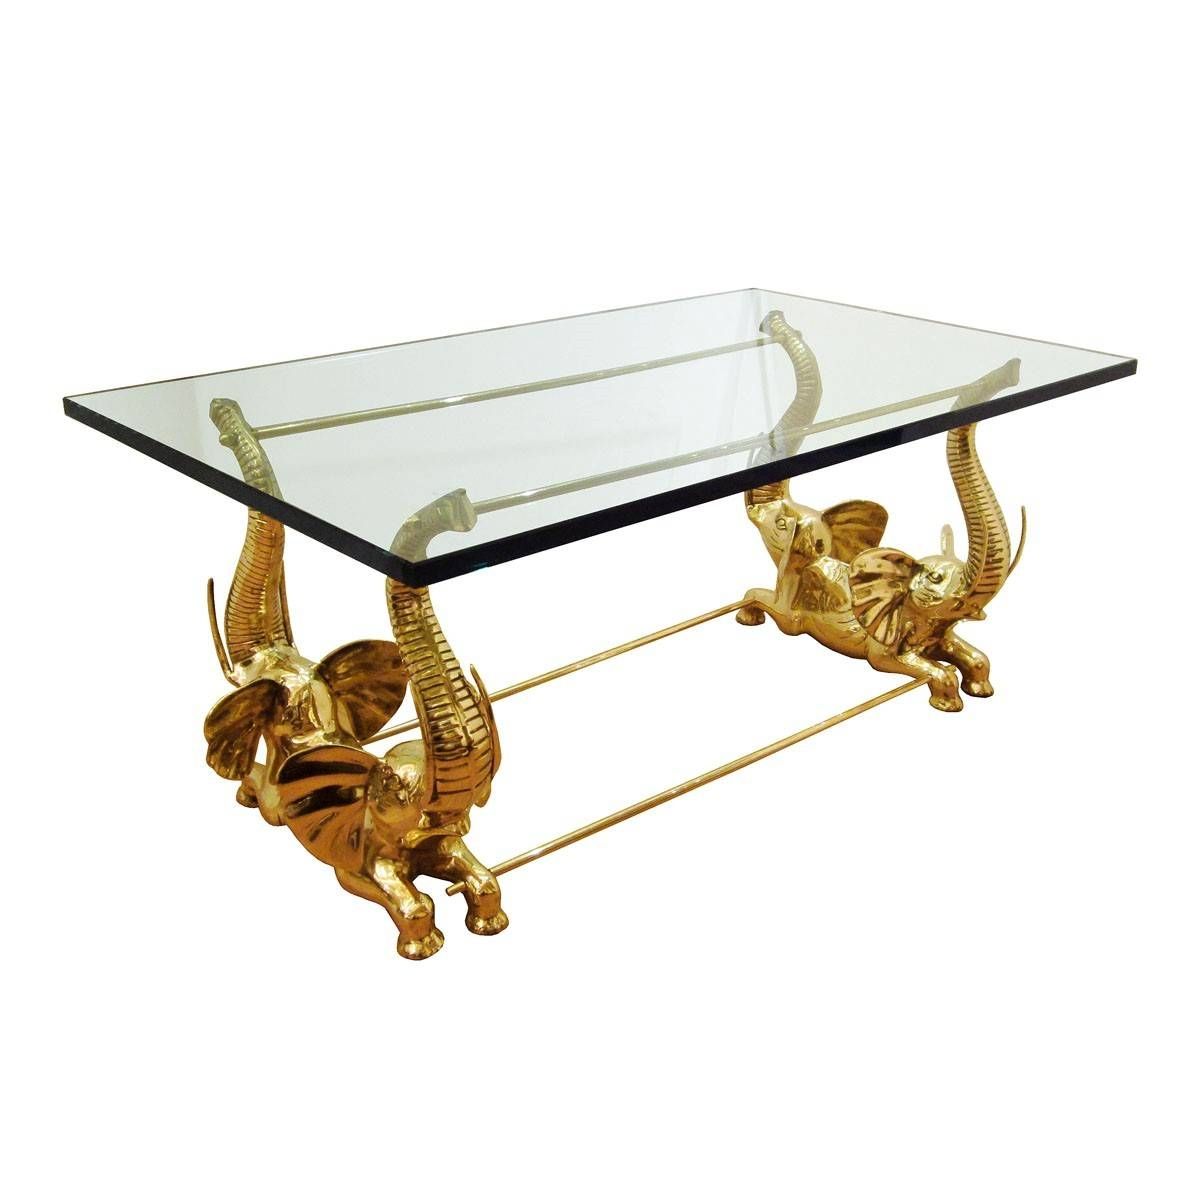 Coffee Table: Unique Elephant Coffee Table Ideas Elephant Side For Elephant Coffee Tables With Glass Top (View 1 of 30)